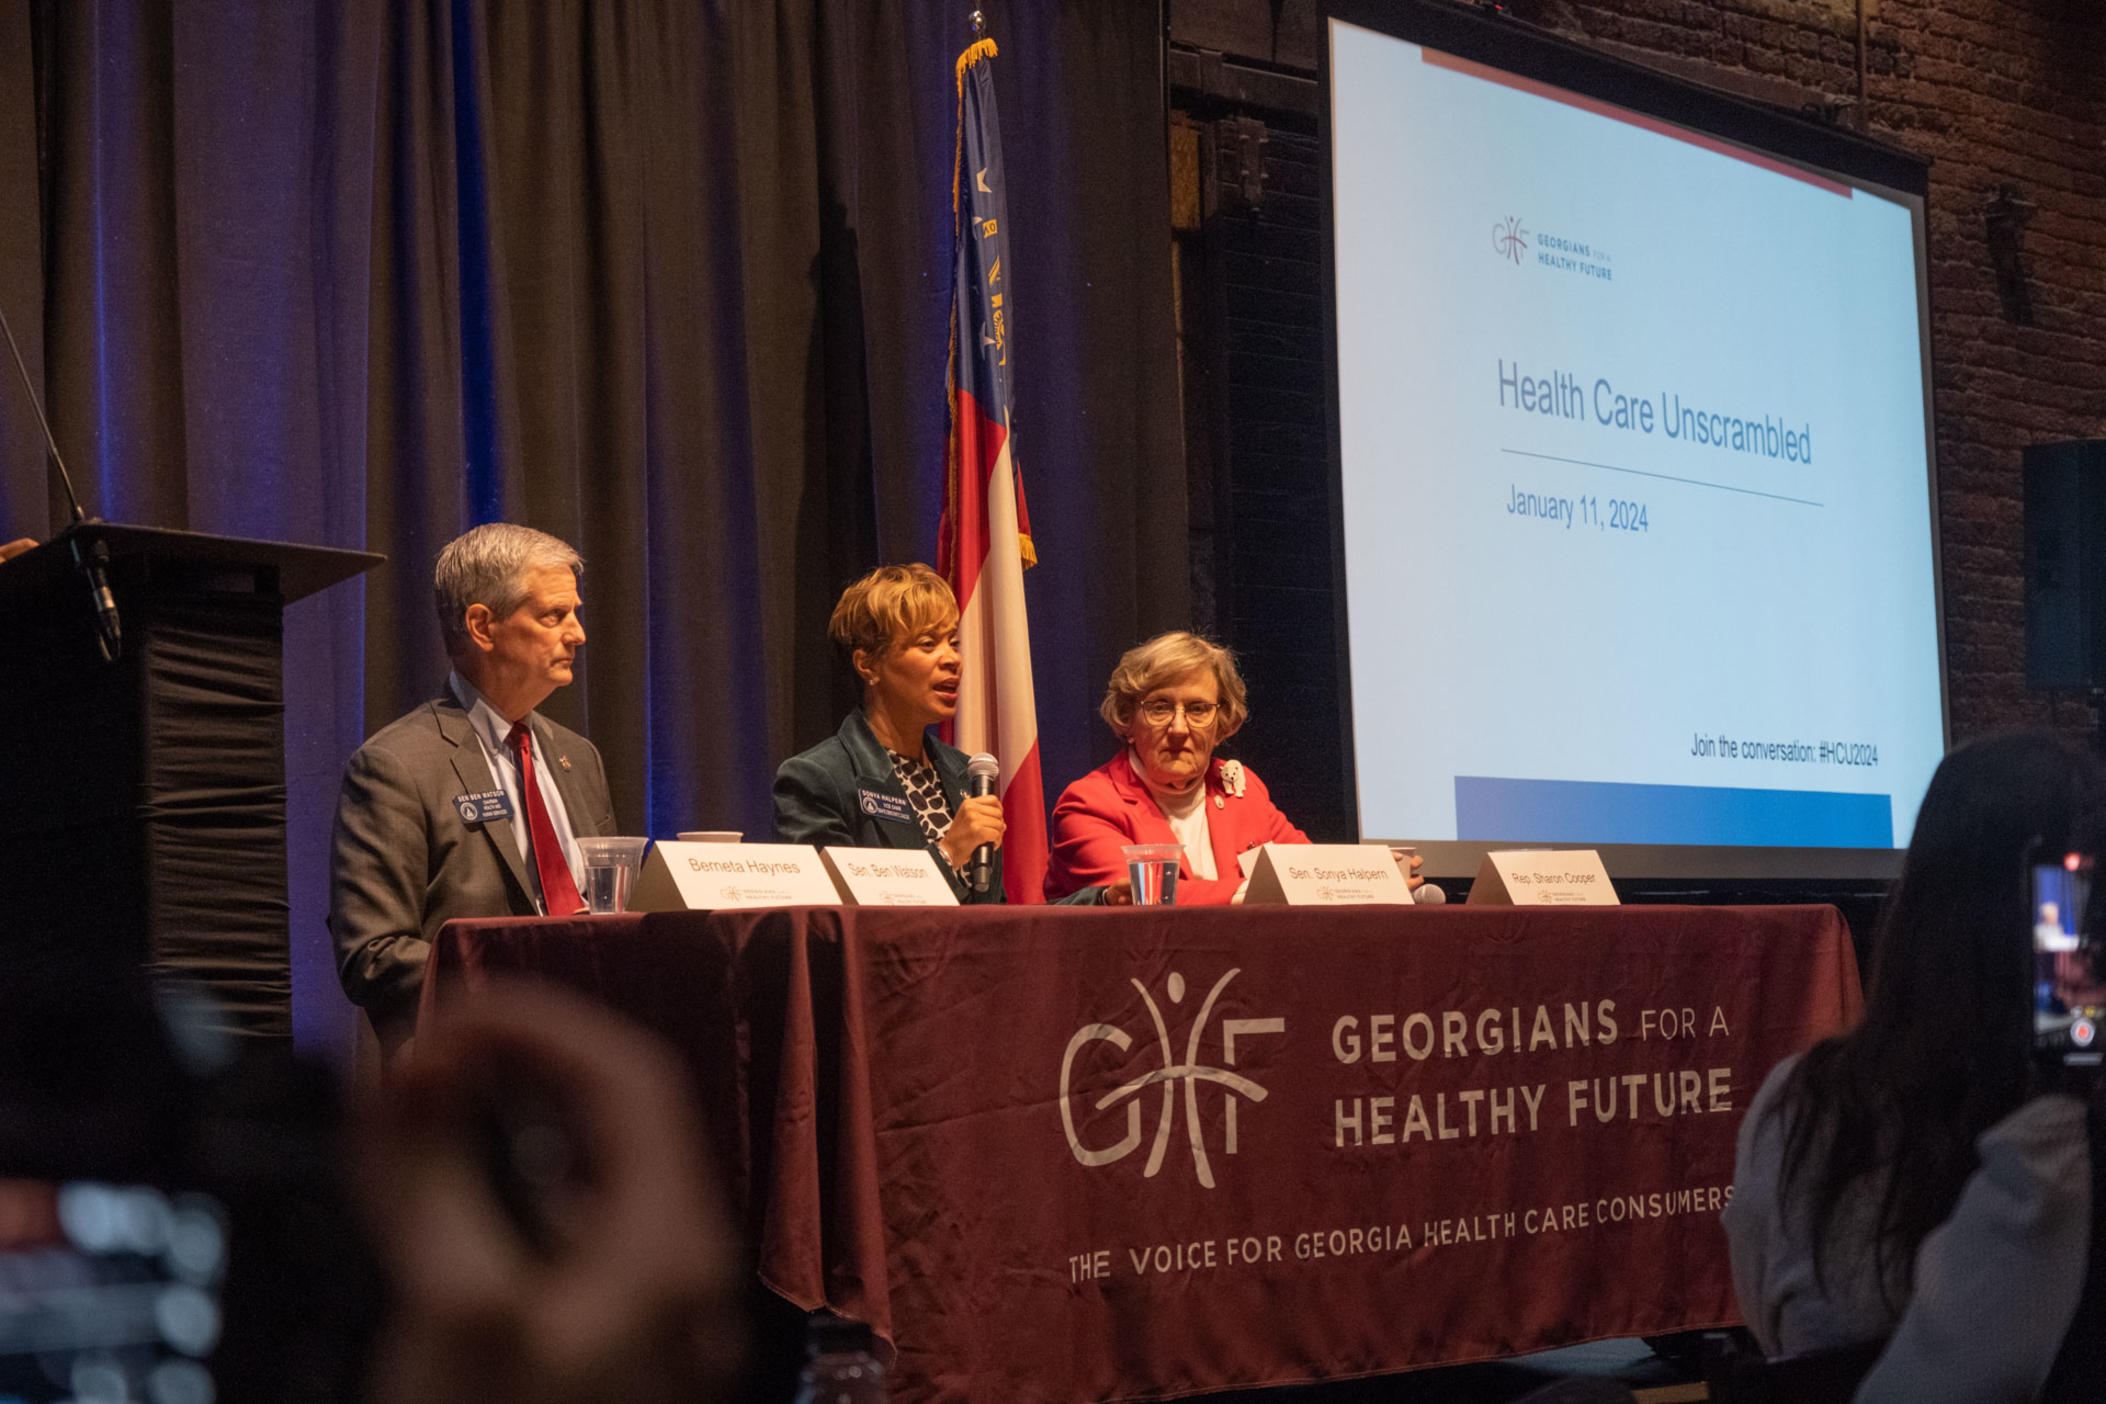 lawmakers at Georgians for a Healthy Future event